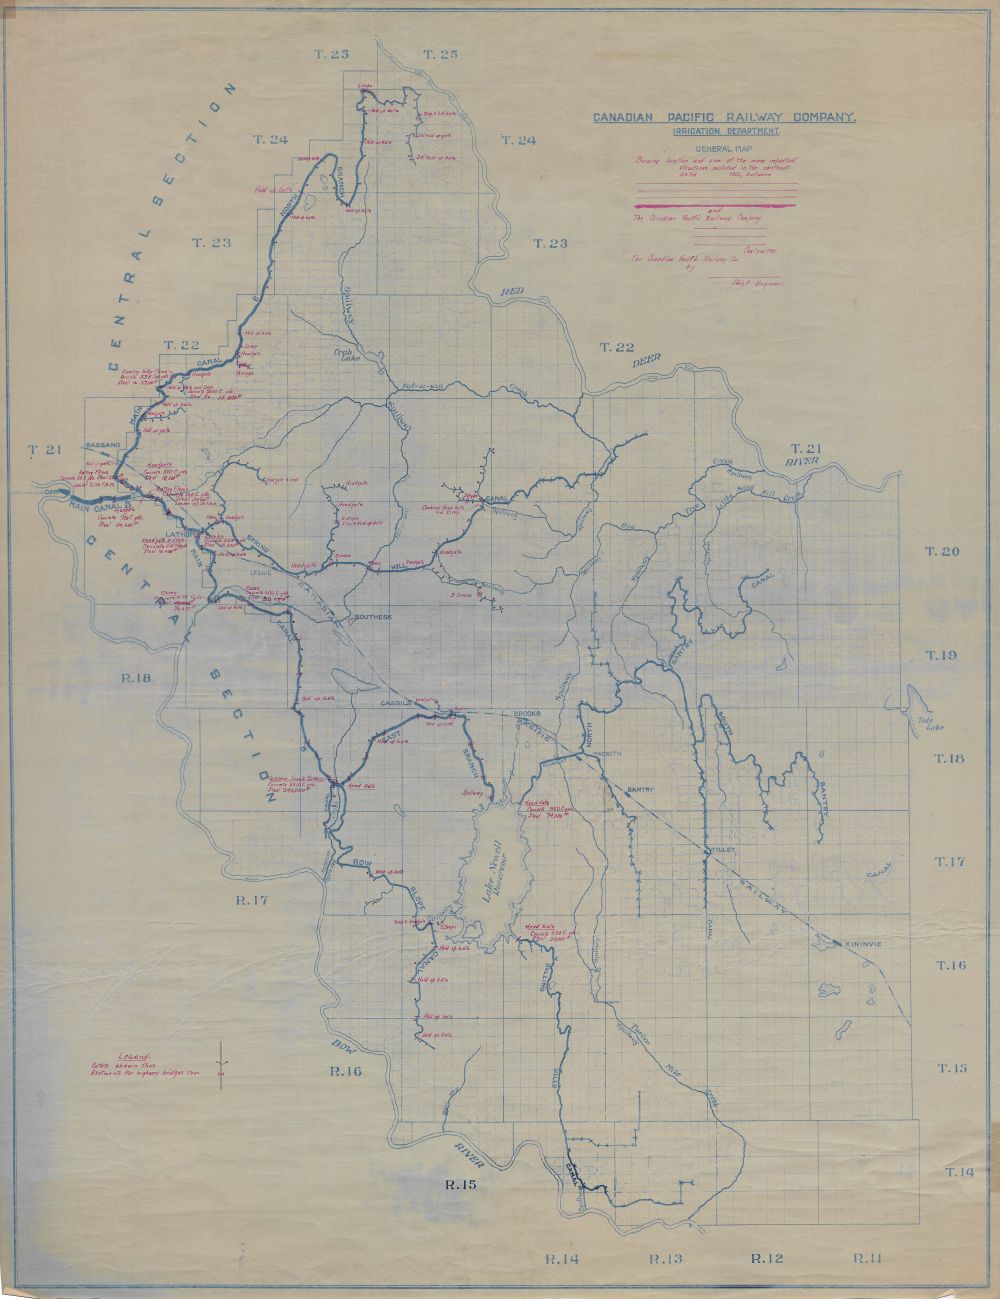 Map of the Eastern Section Irrigation system developed by the Canadian Pacific Railway Company with major water management facilities and canals.